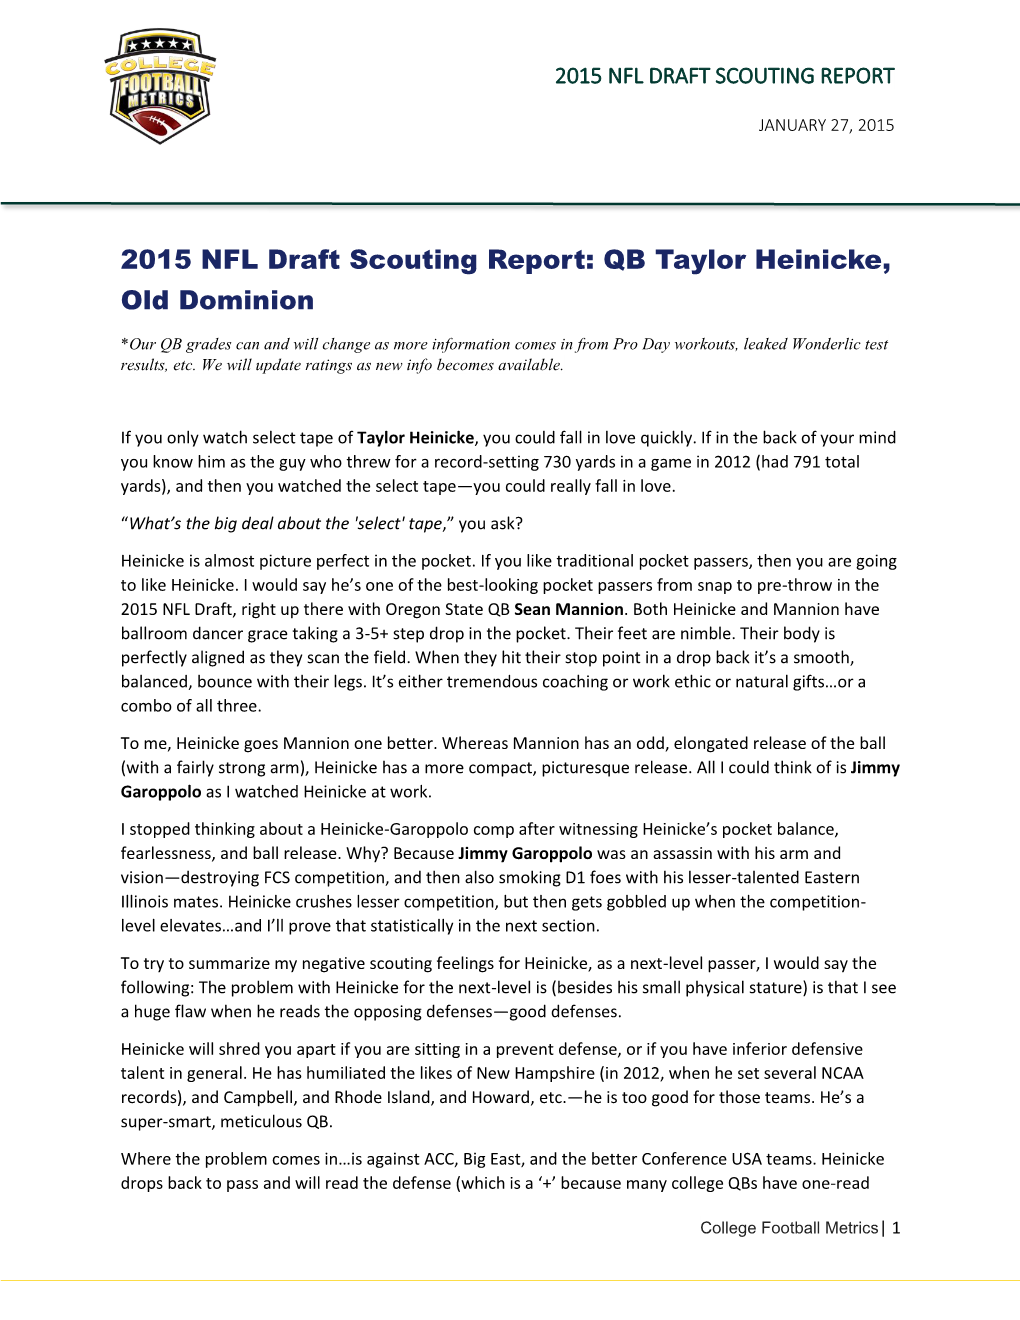 2015 NFL Draft Scouting Report: QB Taylor Heinicke, Old Dominion